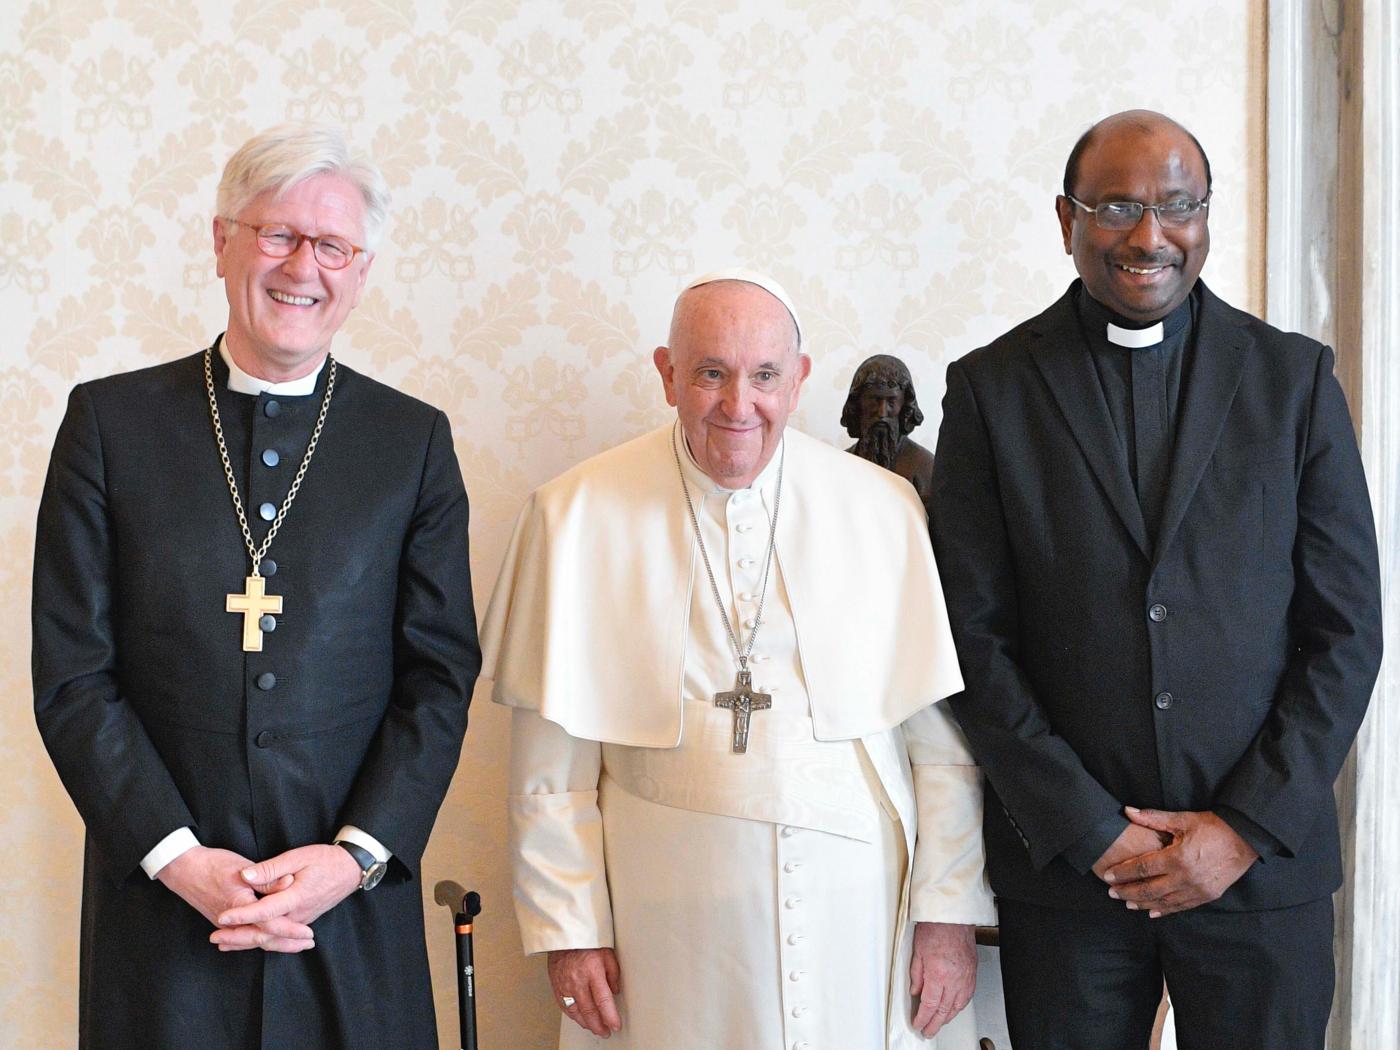 Bishop Bedford-Strohm, moderator of the WCC central committee, Pope Francis, and Rev. Prof. Dr Jerry Pillay, WCC general secretary, during the meeting at the Vatican on 23 March.